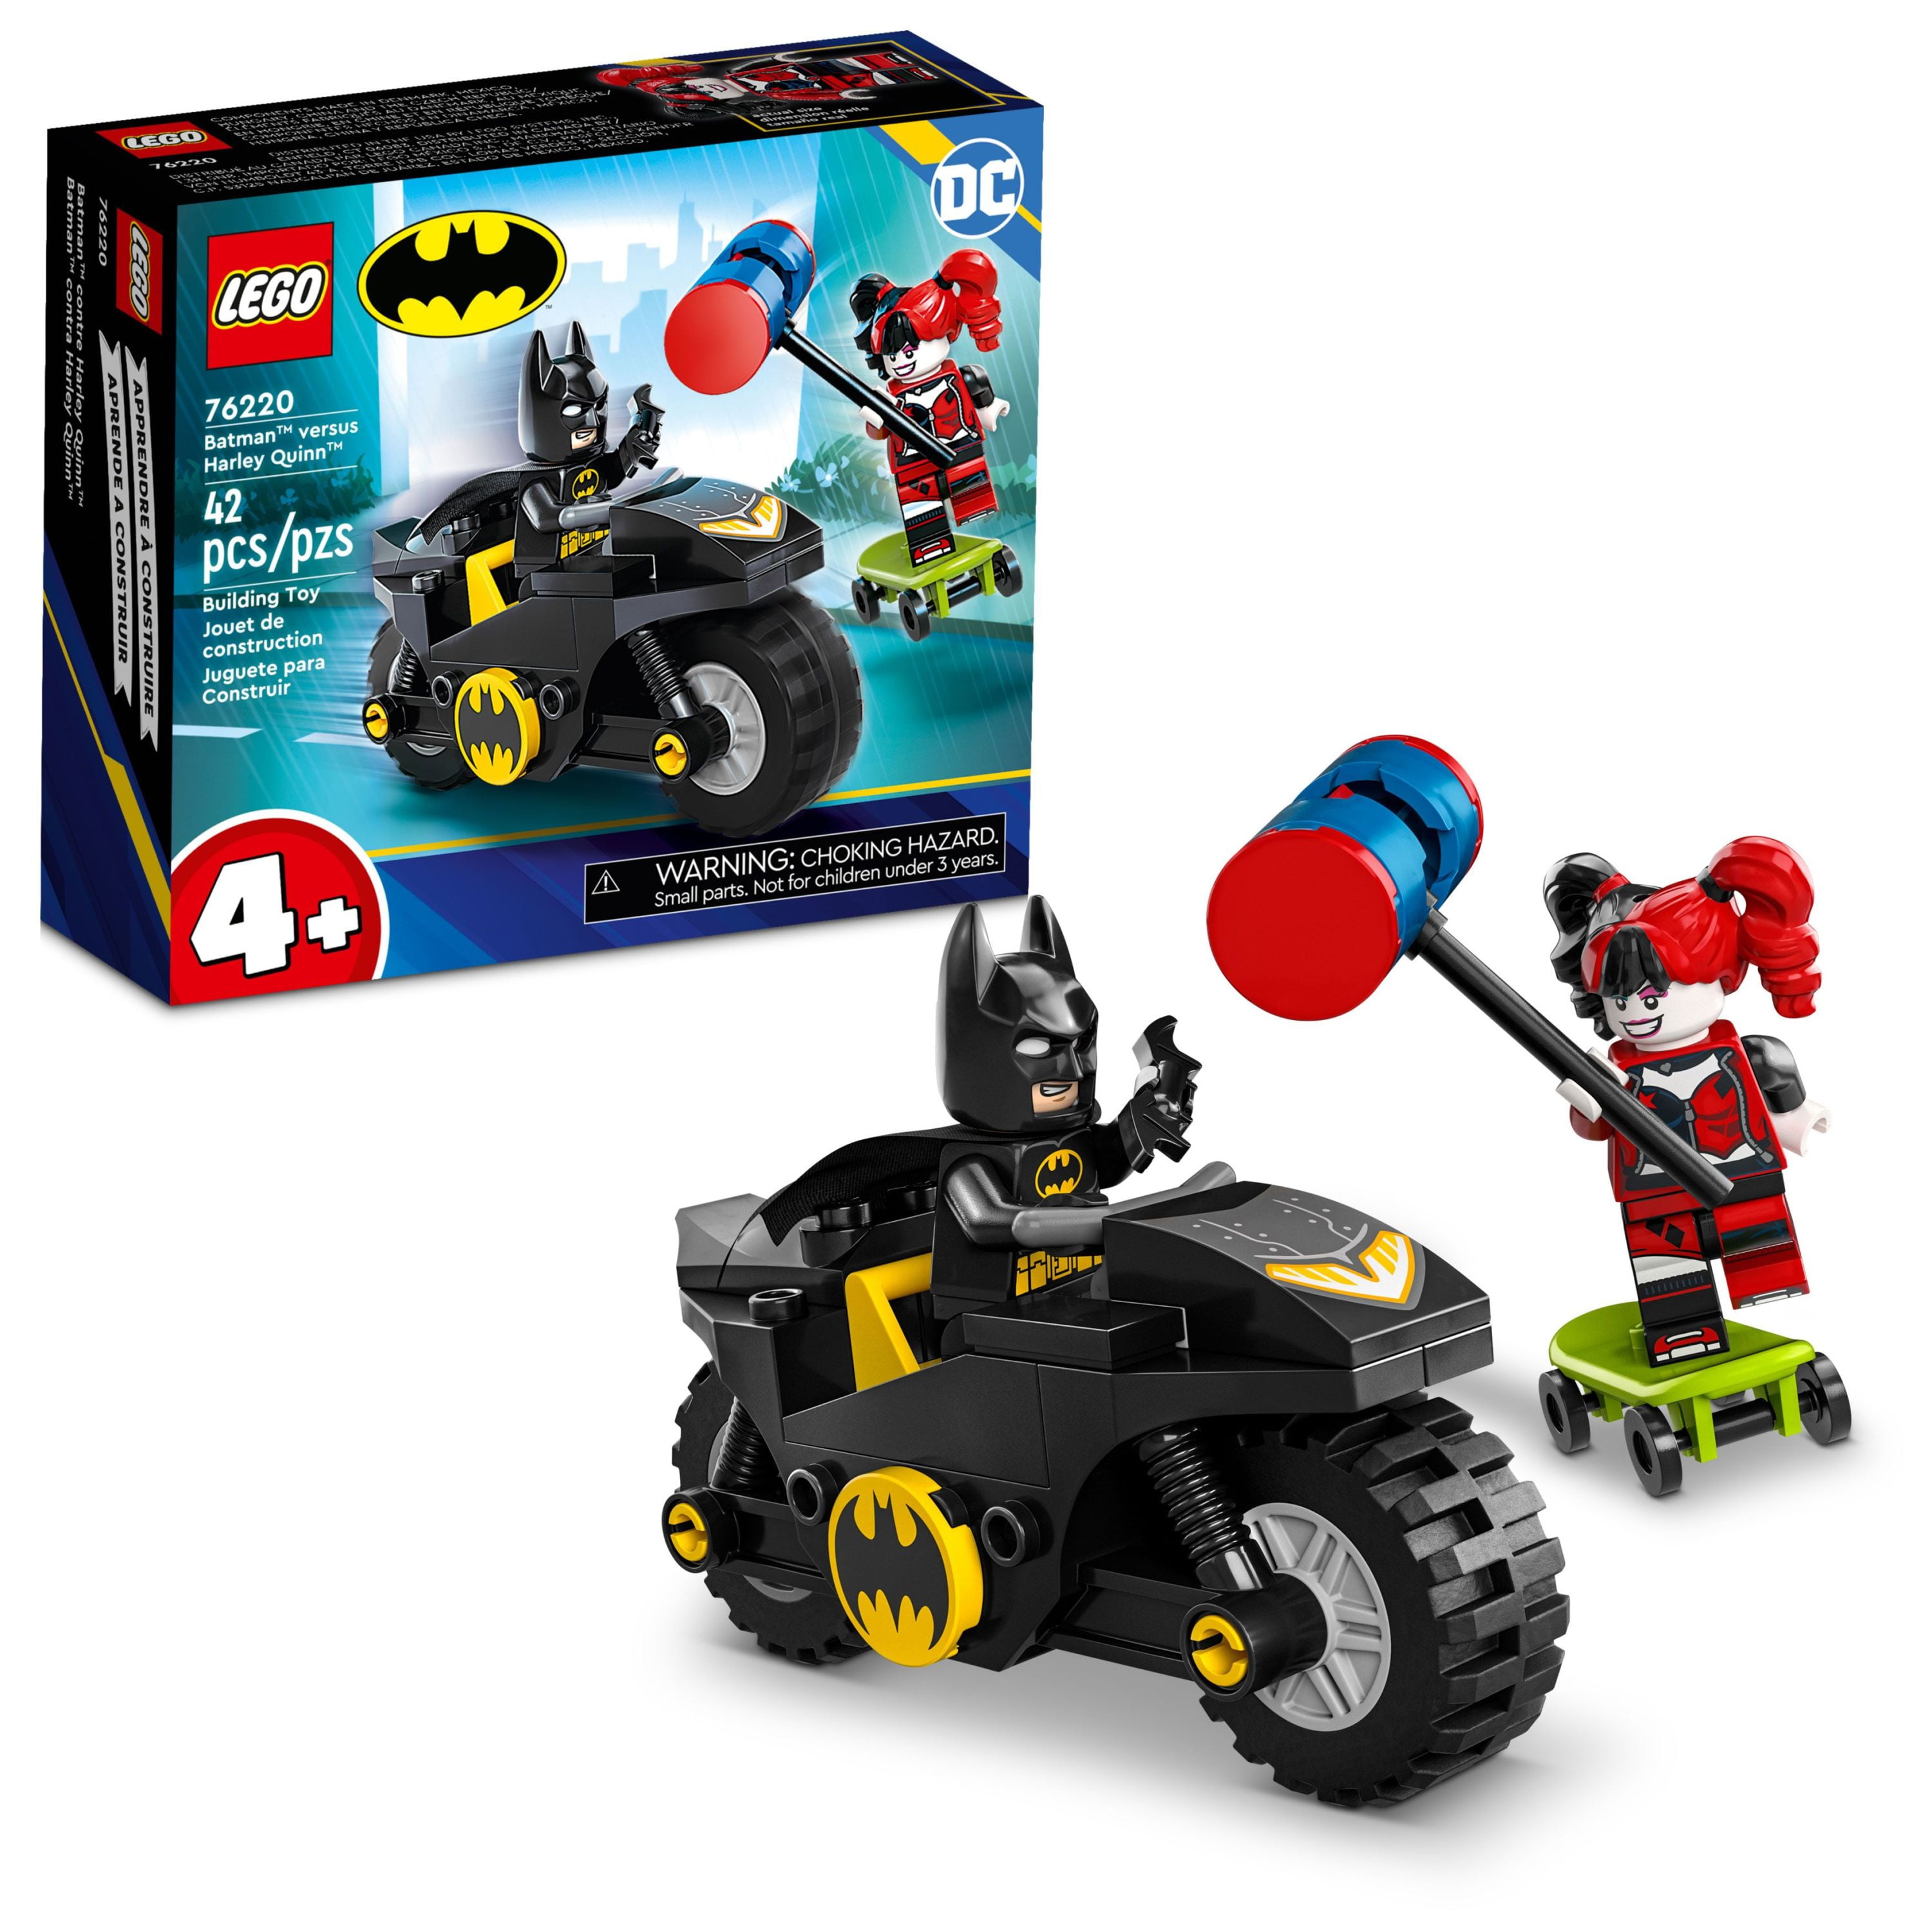 LEGO DC Batman versus Harley Quinn 76220, Superhero Action Figure Set with Skateboard and Motorcycle Toy for Kids, Boys and Girls Aged 4 Plus